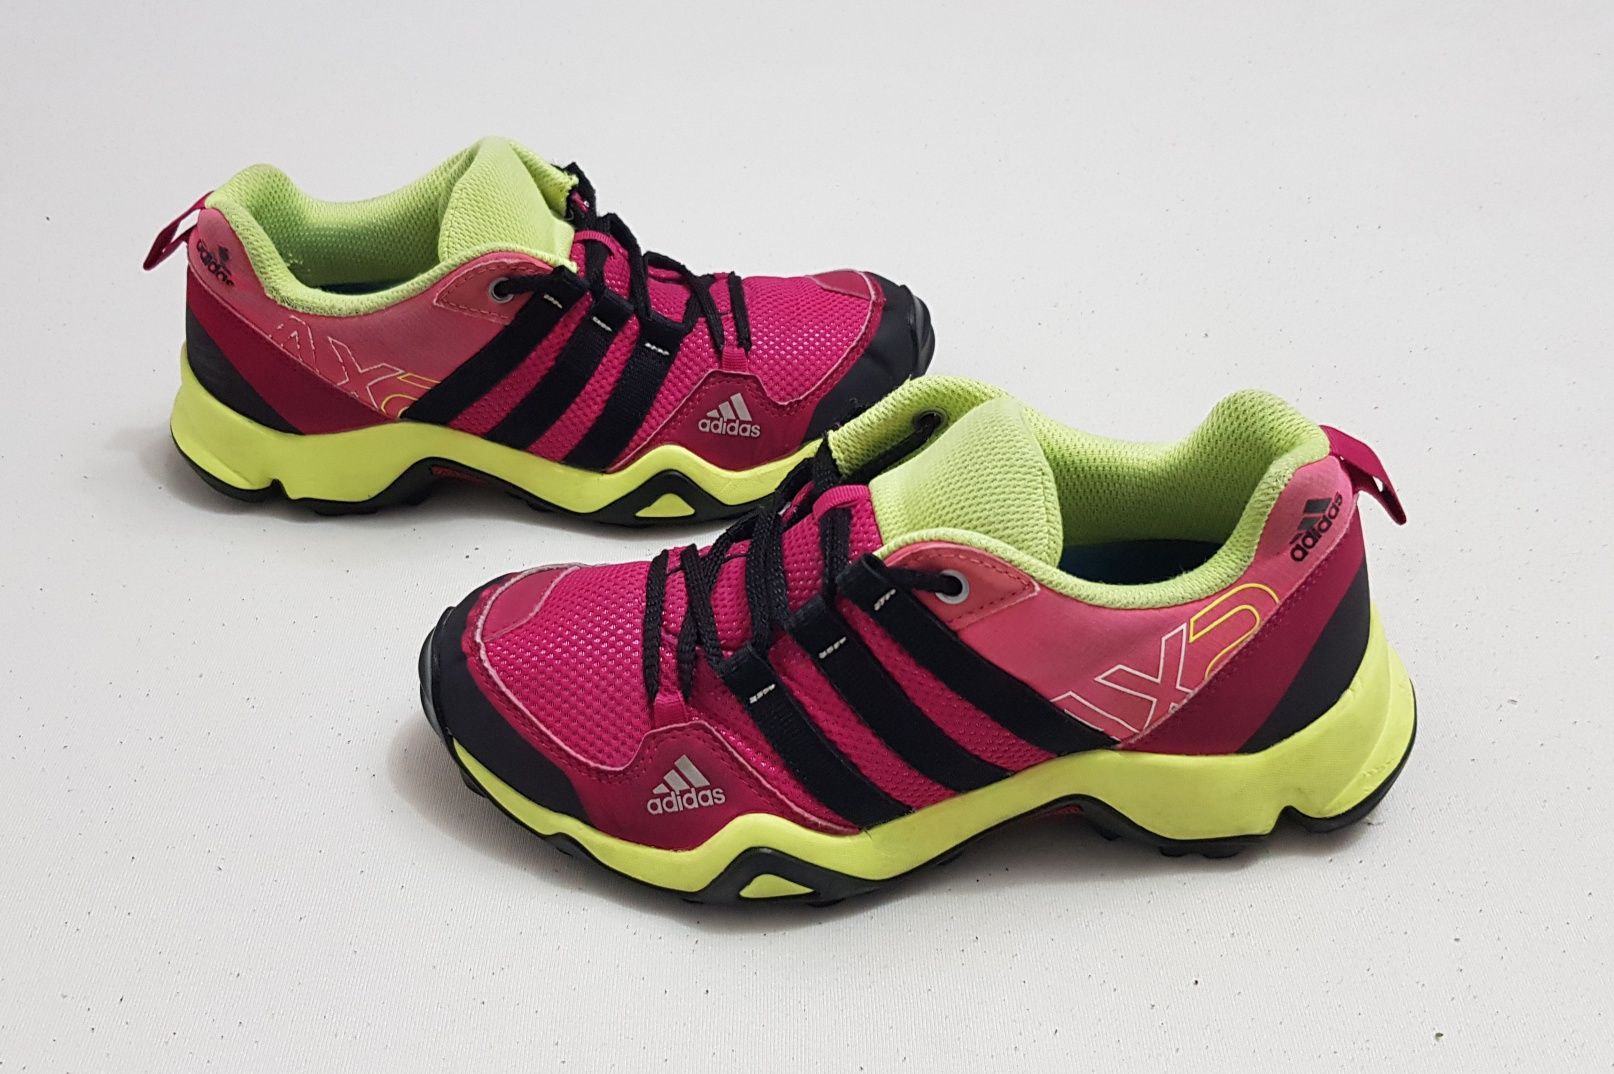 Outdoor Ax 2 K Lace Up Hiking Sneakers, 36 Traxion Alba Iulia • OLX.ro